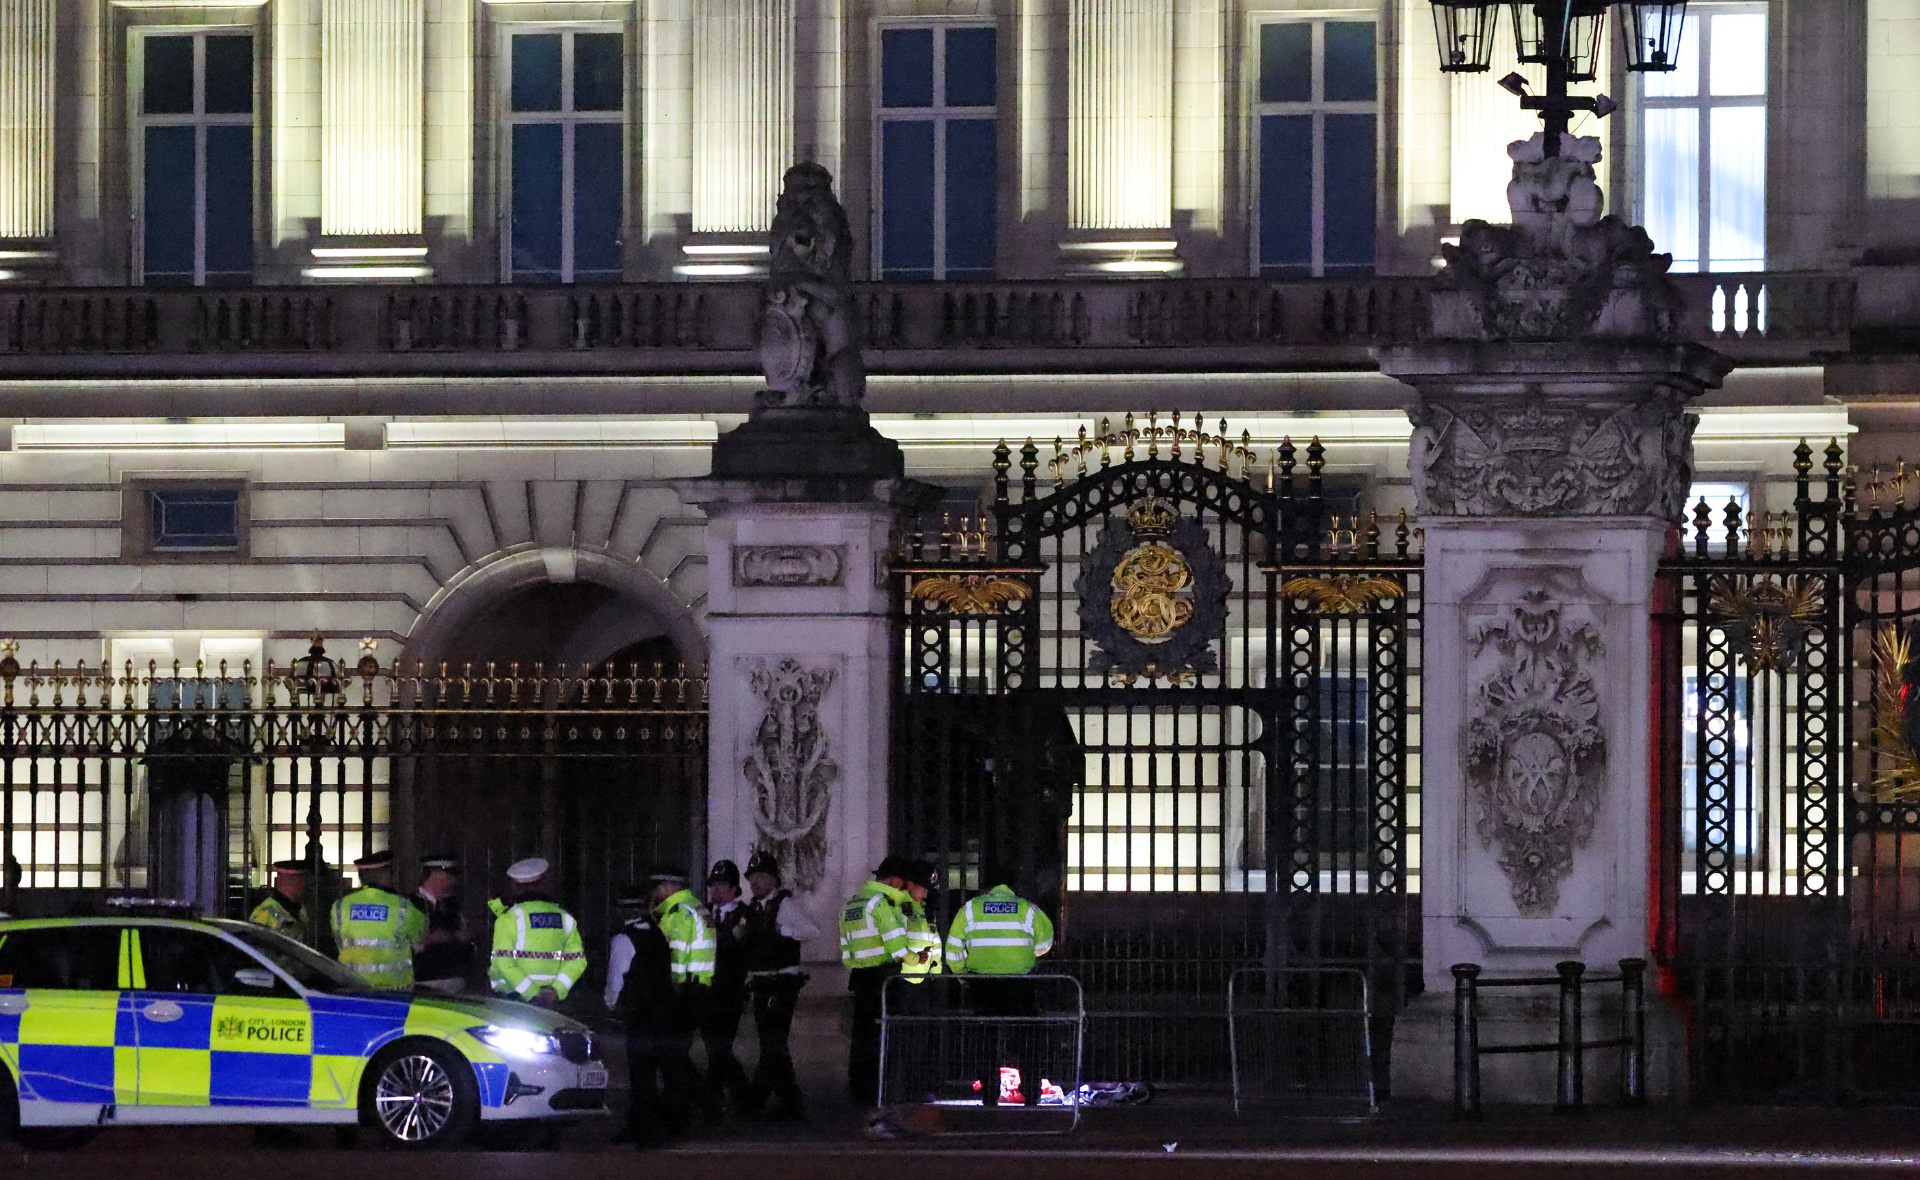 Buckingham Palace sent into emergency lockdown after ”loud explosion”